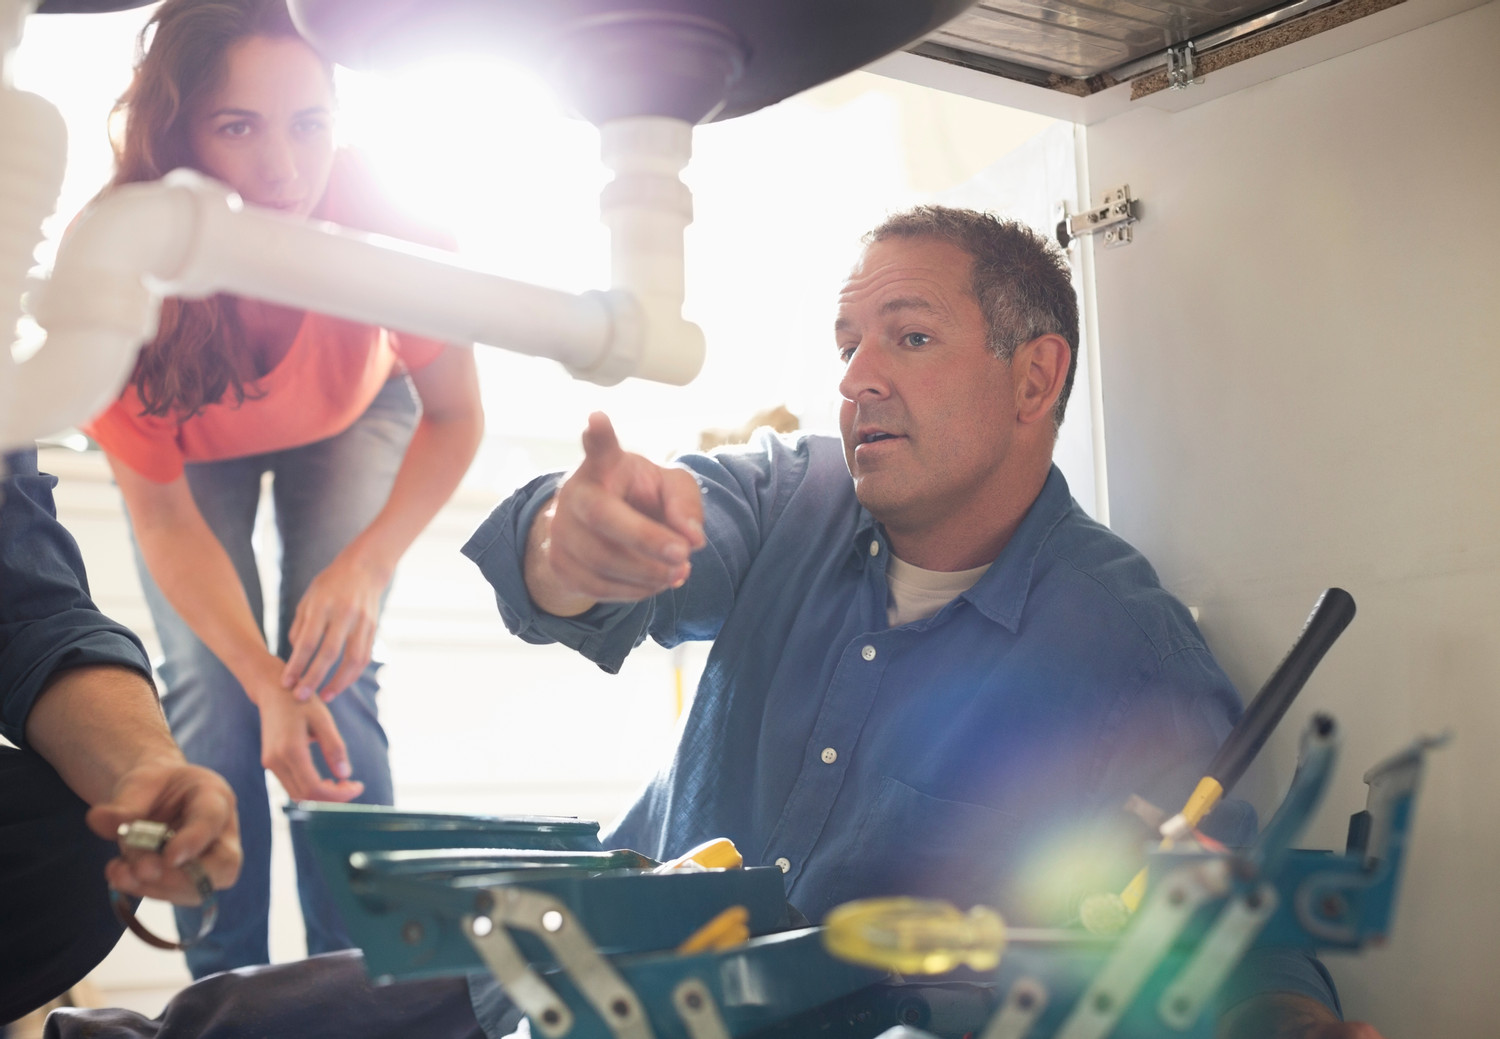 The Best Cheap Plumbers in Your Area